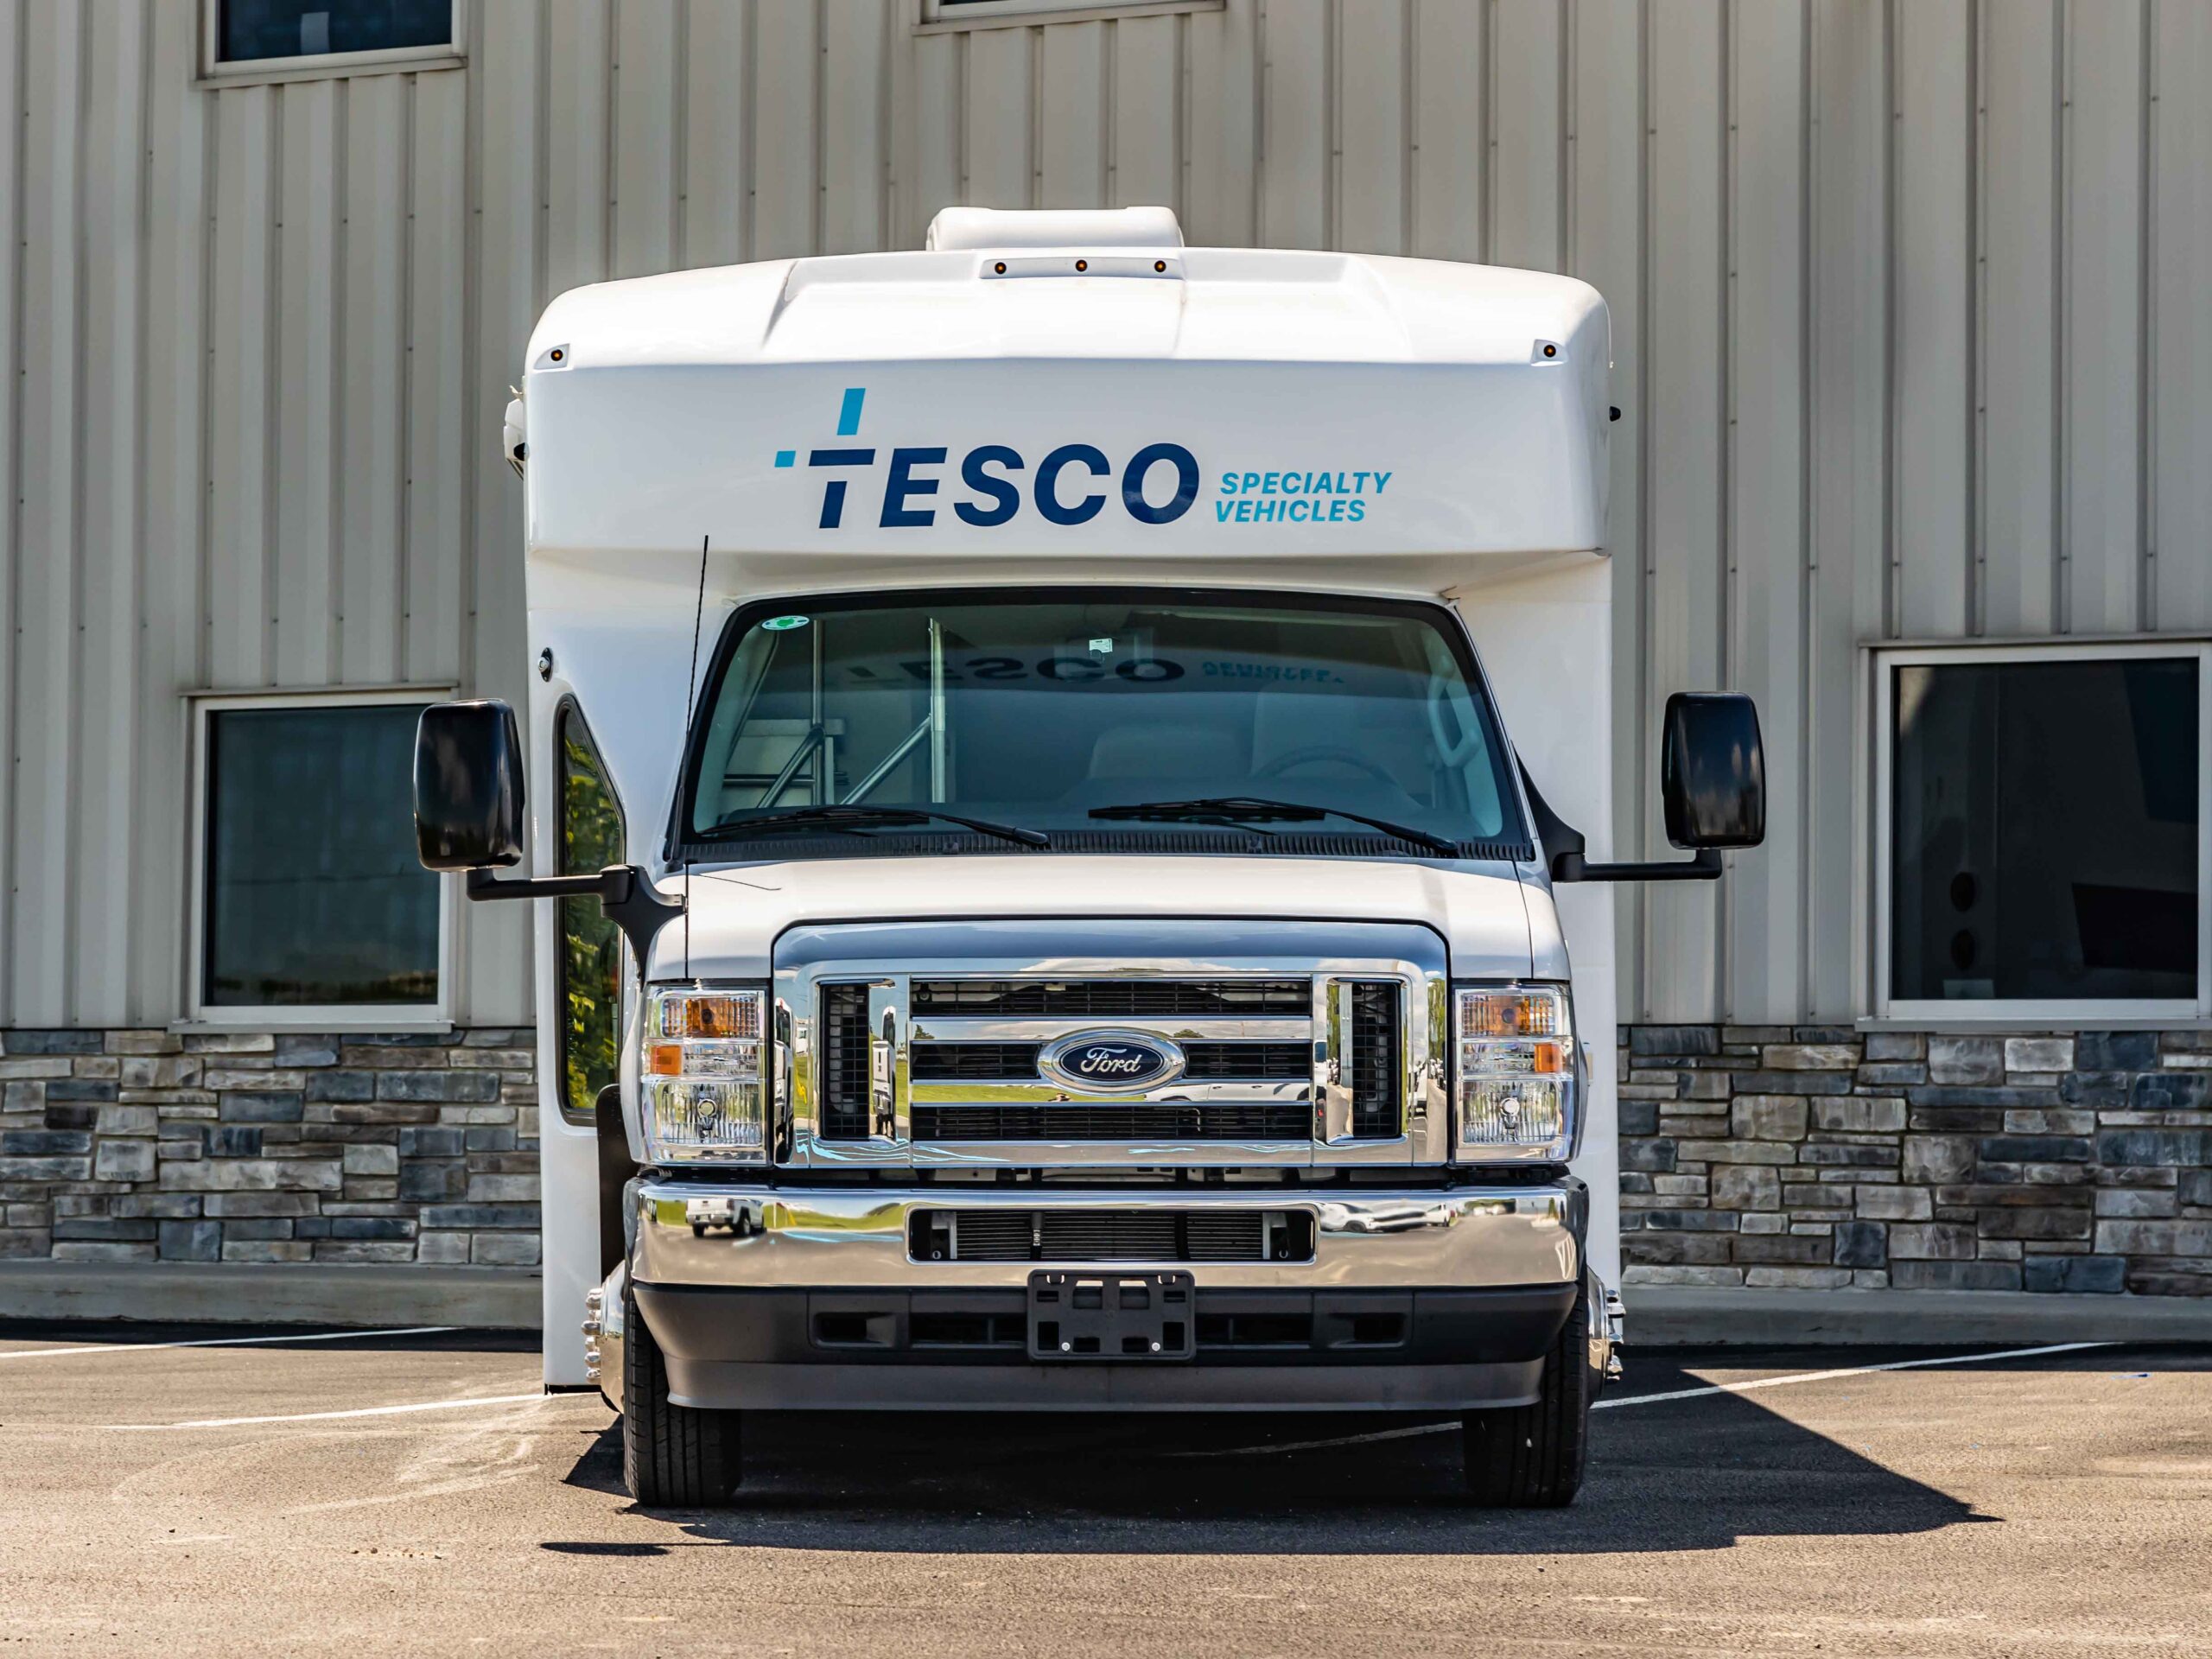 Mobile medical clinic from TESCO Specialty Vehicles.